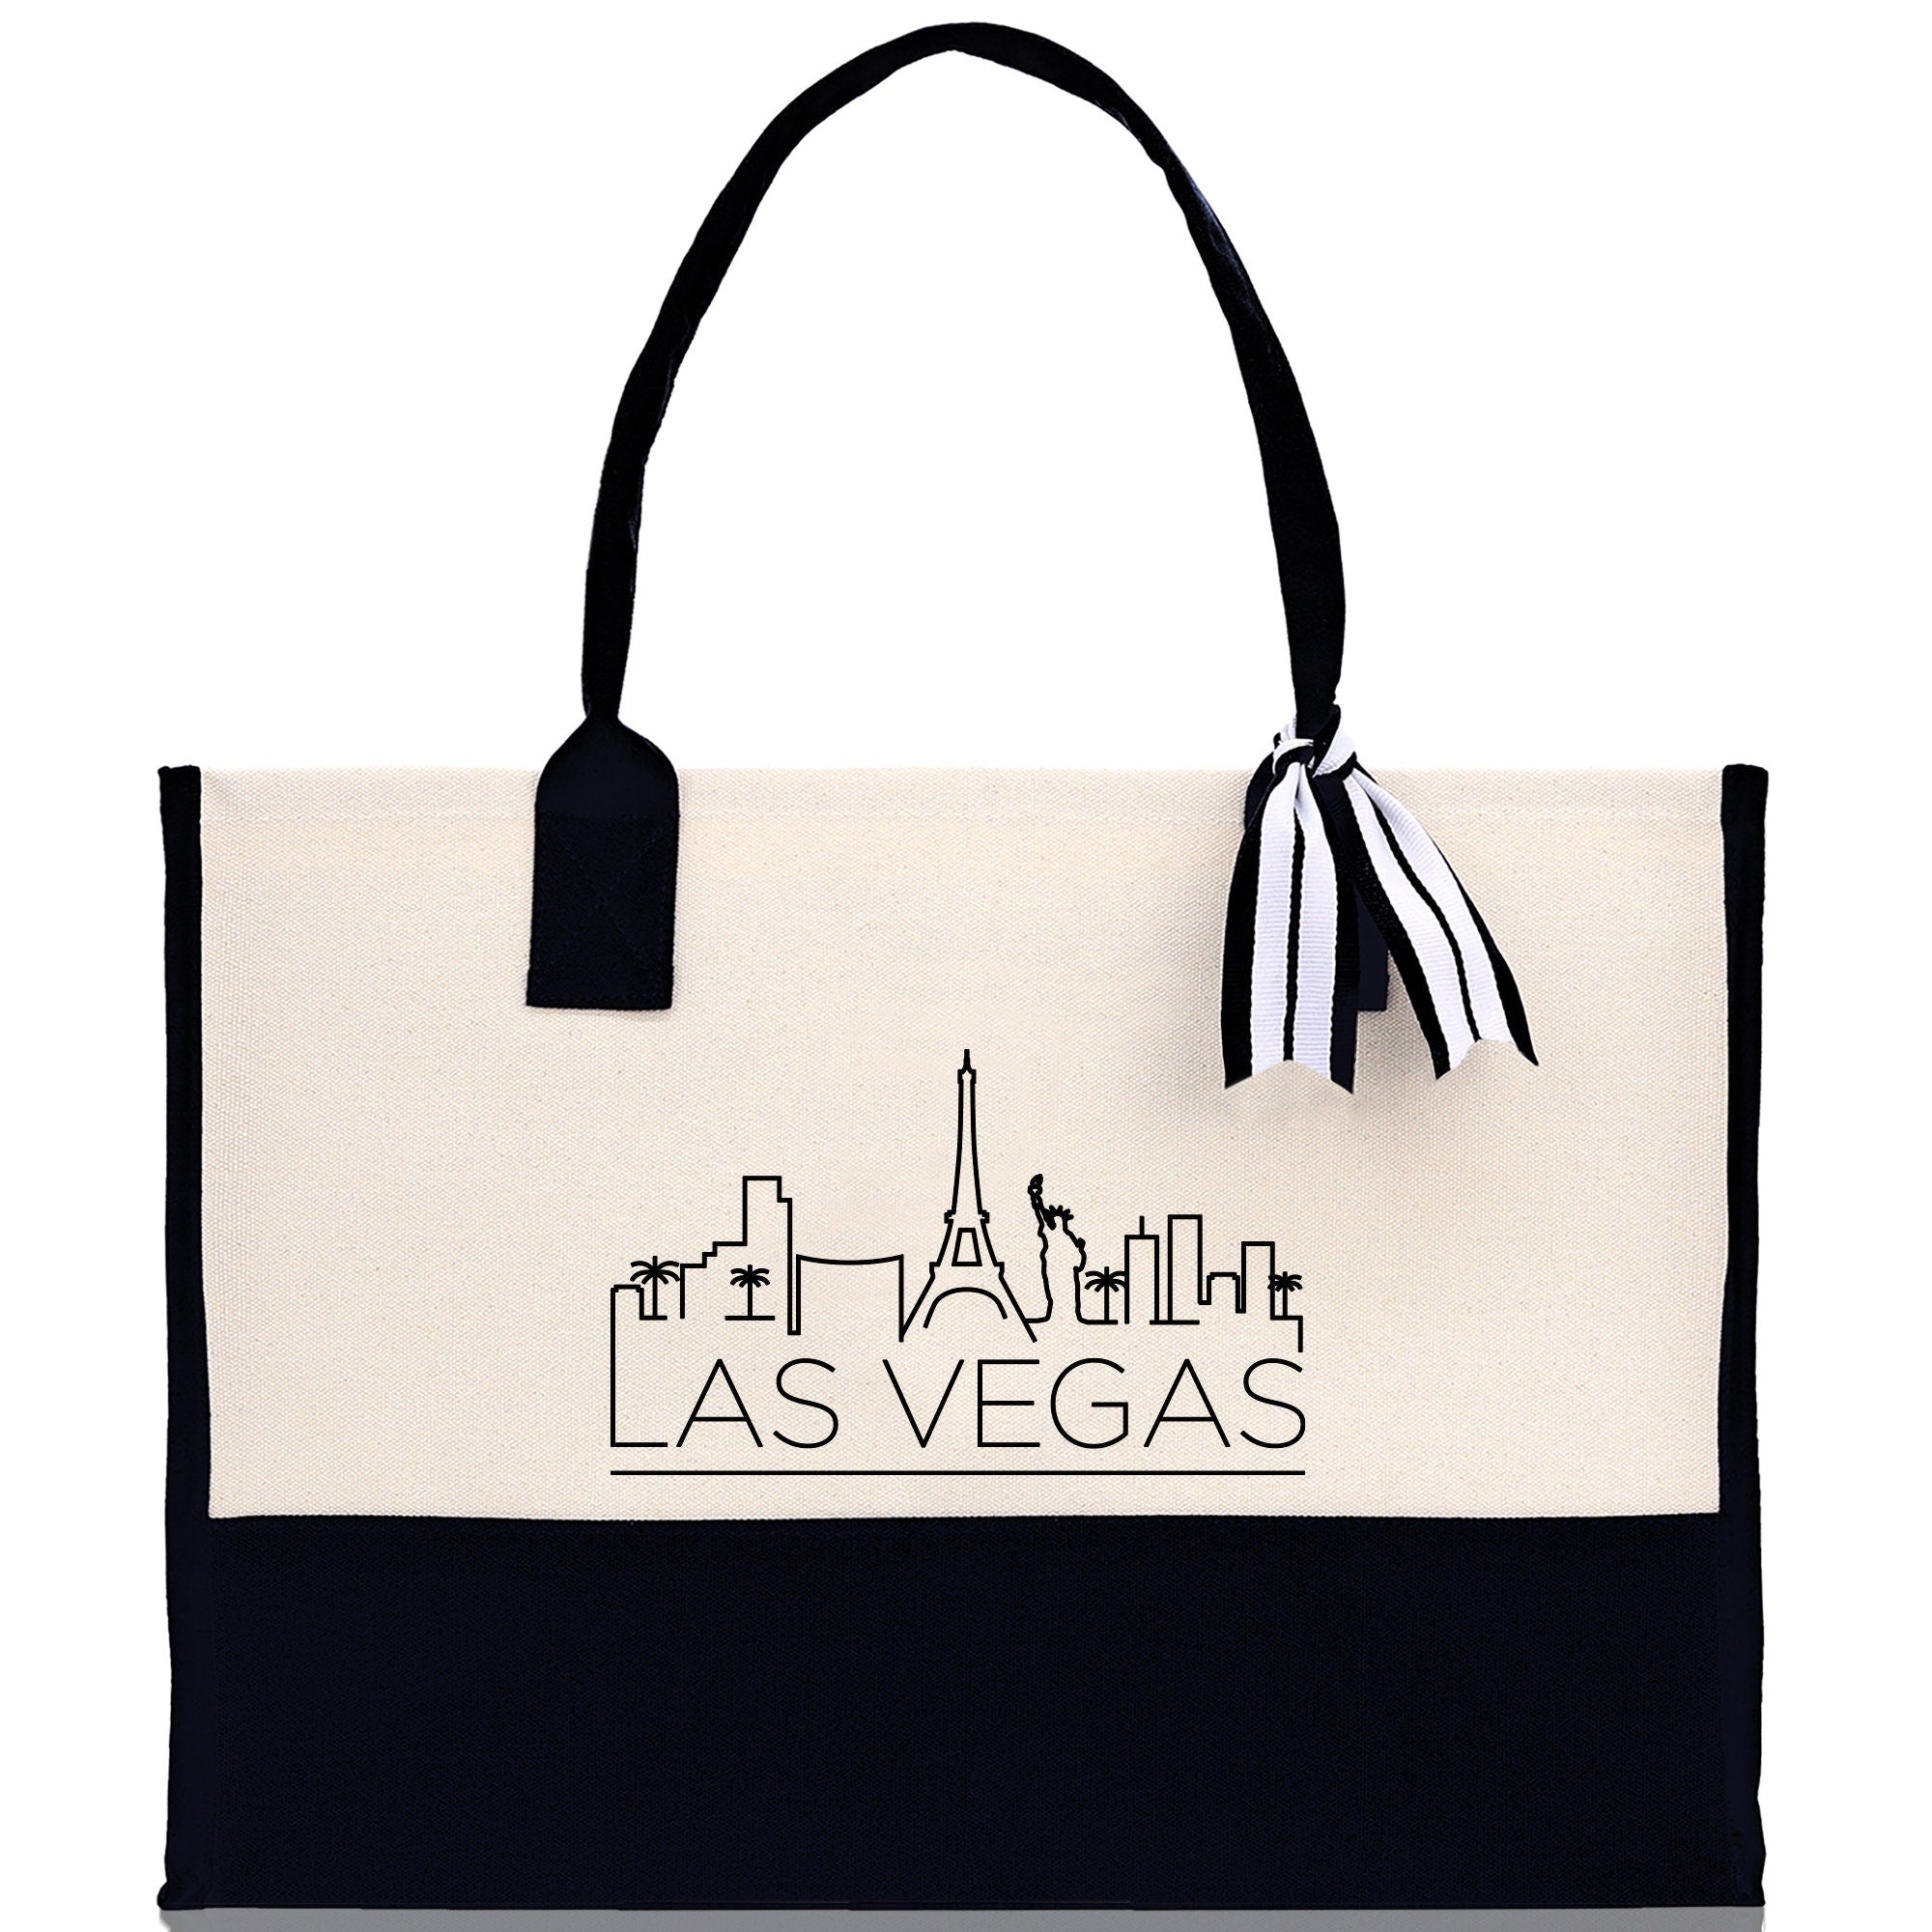 Las Vegas Cotton Canvas Tote Bag Travel Vacation Tote Employee and Client Gift Wedding Favor Birthday Welcome Tote Bag Bridesmaid Gift